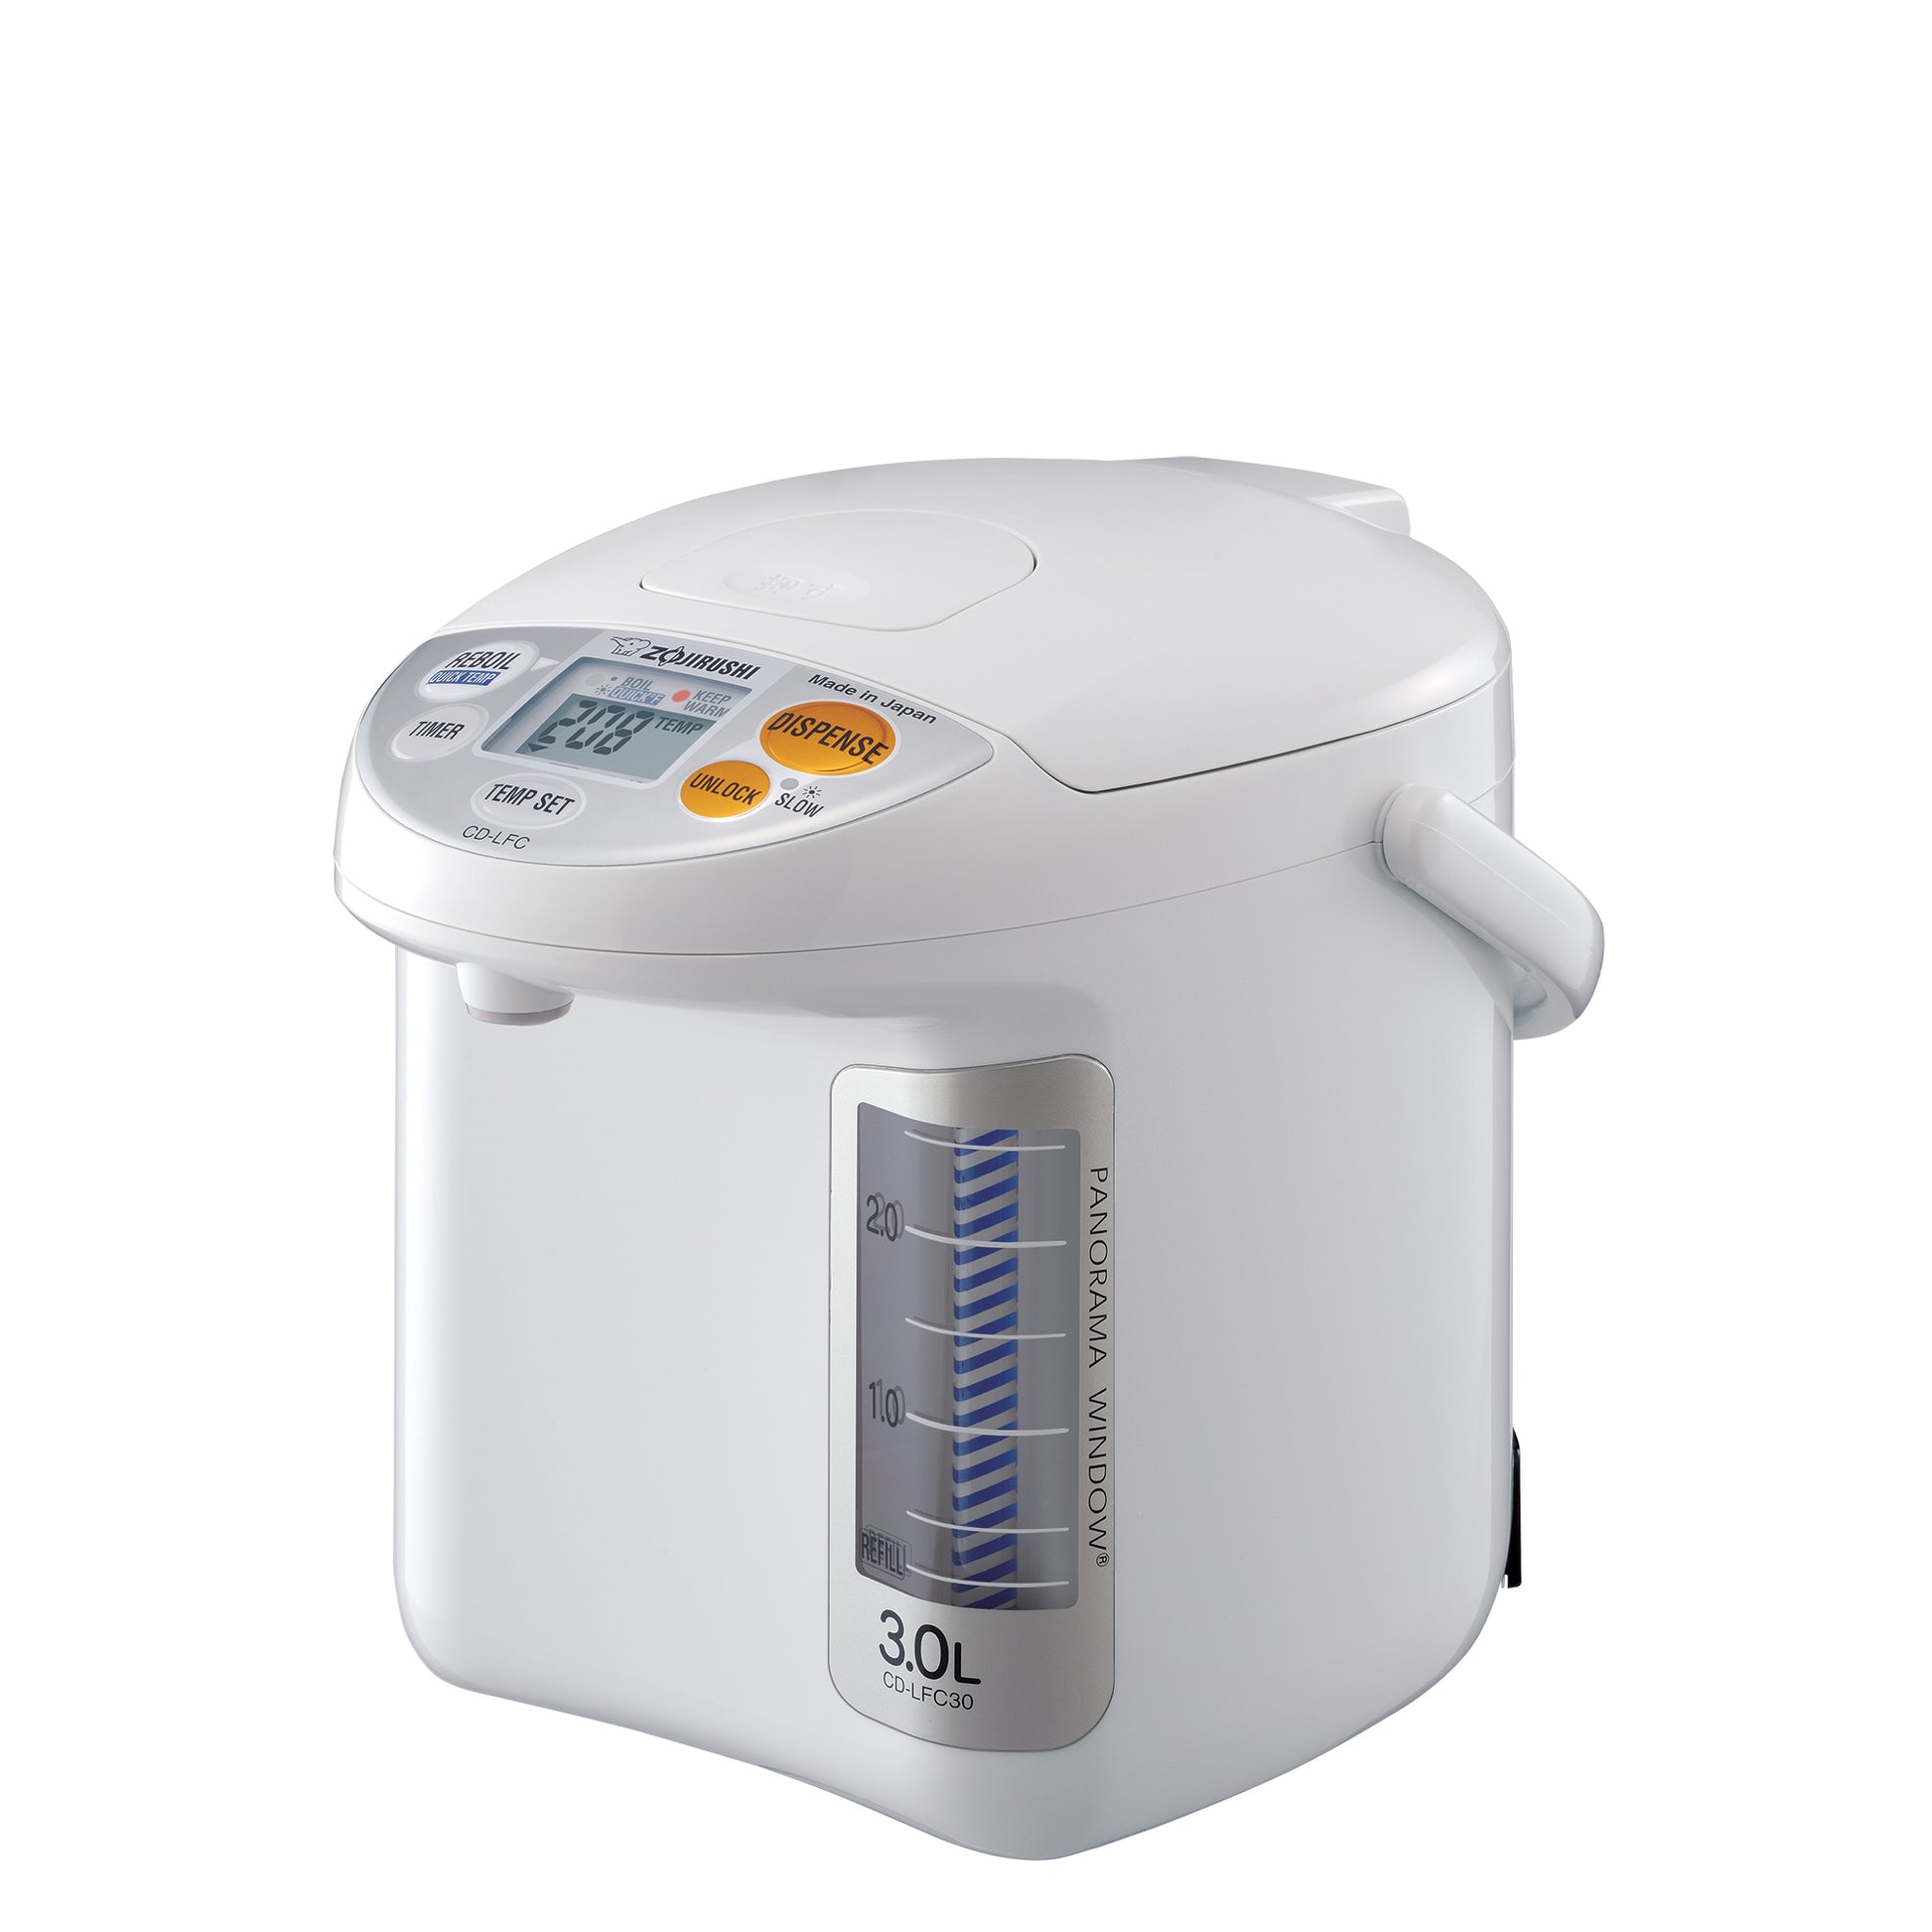 Instant Electric Hot Water Boiler and Warmer, 5-Liter LCD Water Pot wi